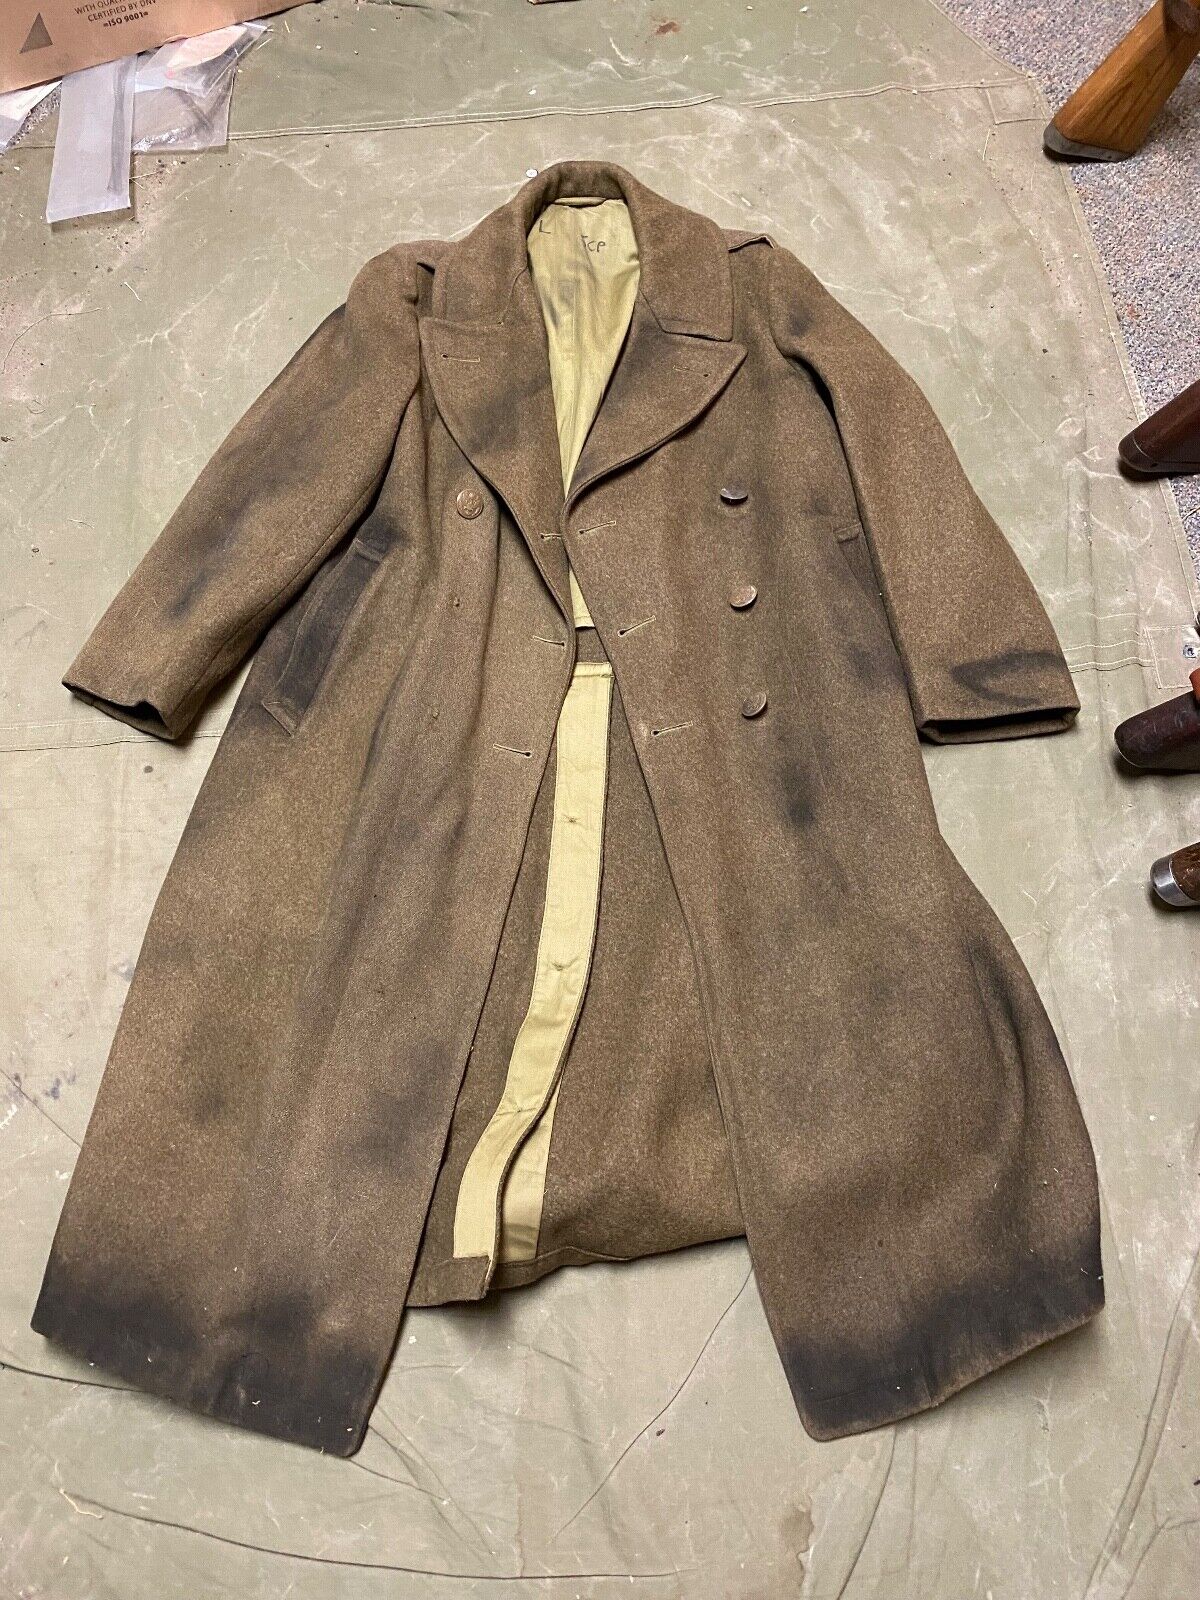 ORIGINAL WWII US ARMY WINTER M1938 GREATCOAT OVERCOAT- LARGE 44R